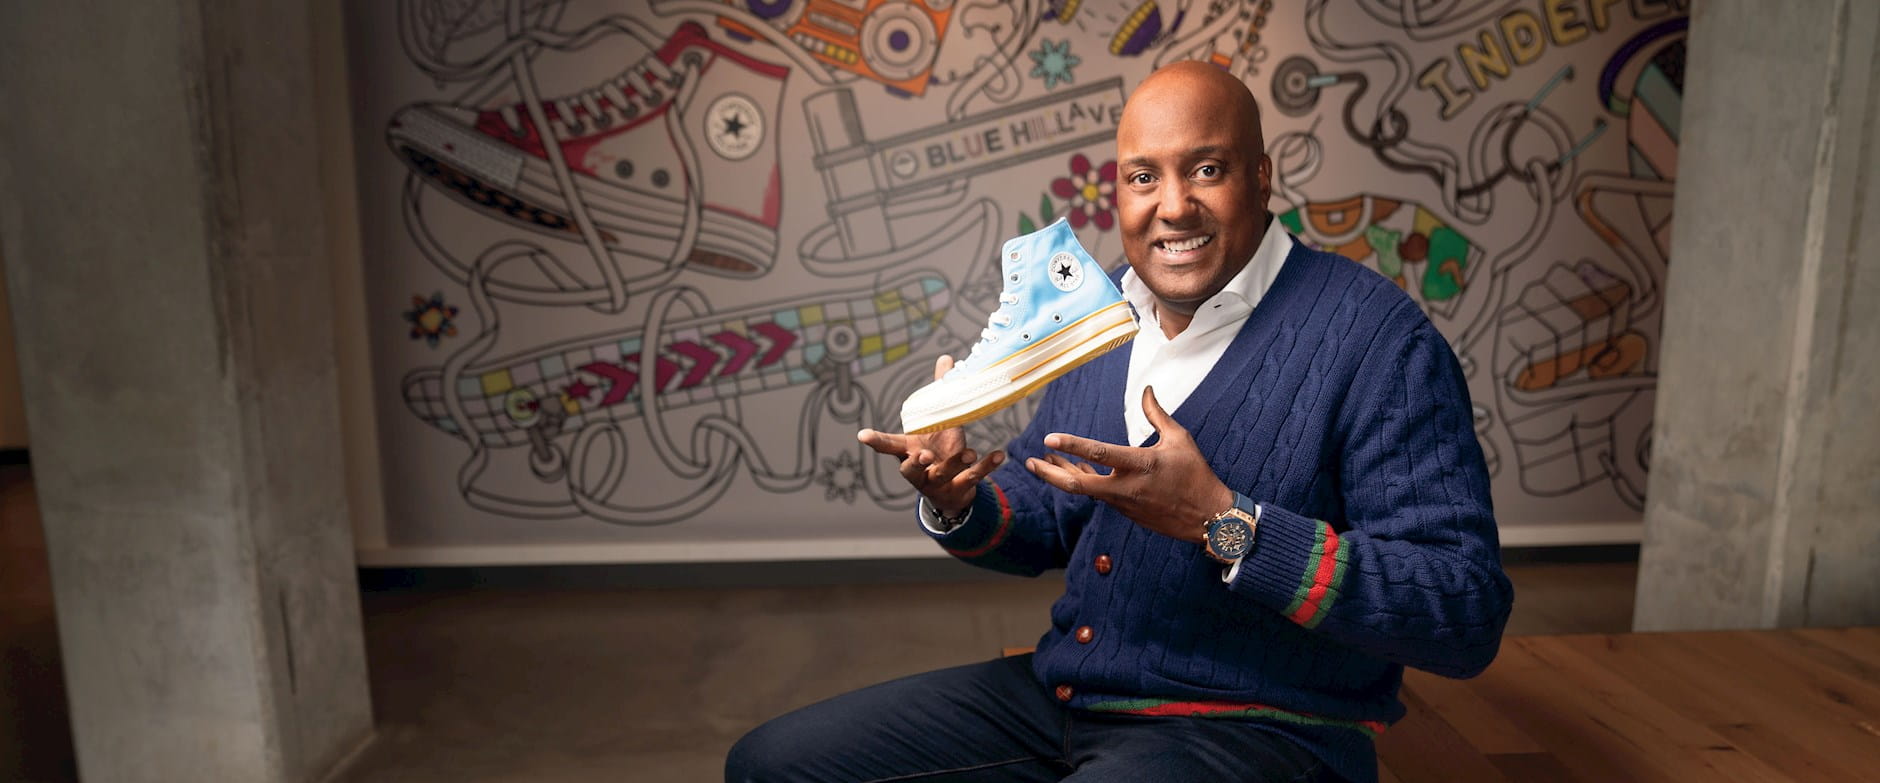 G. Scott Uzzell, CEO of Converse, smiling and holding a blue Converse shoe